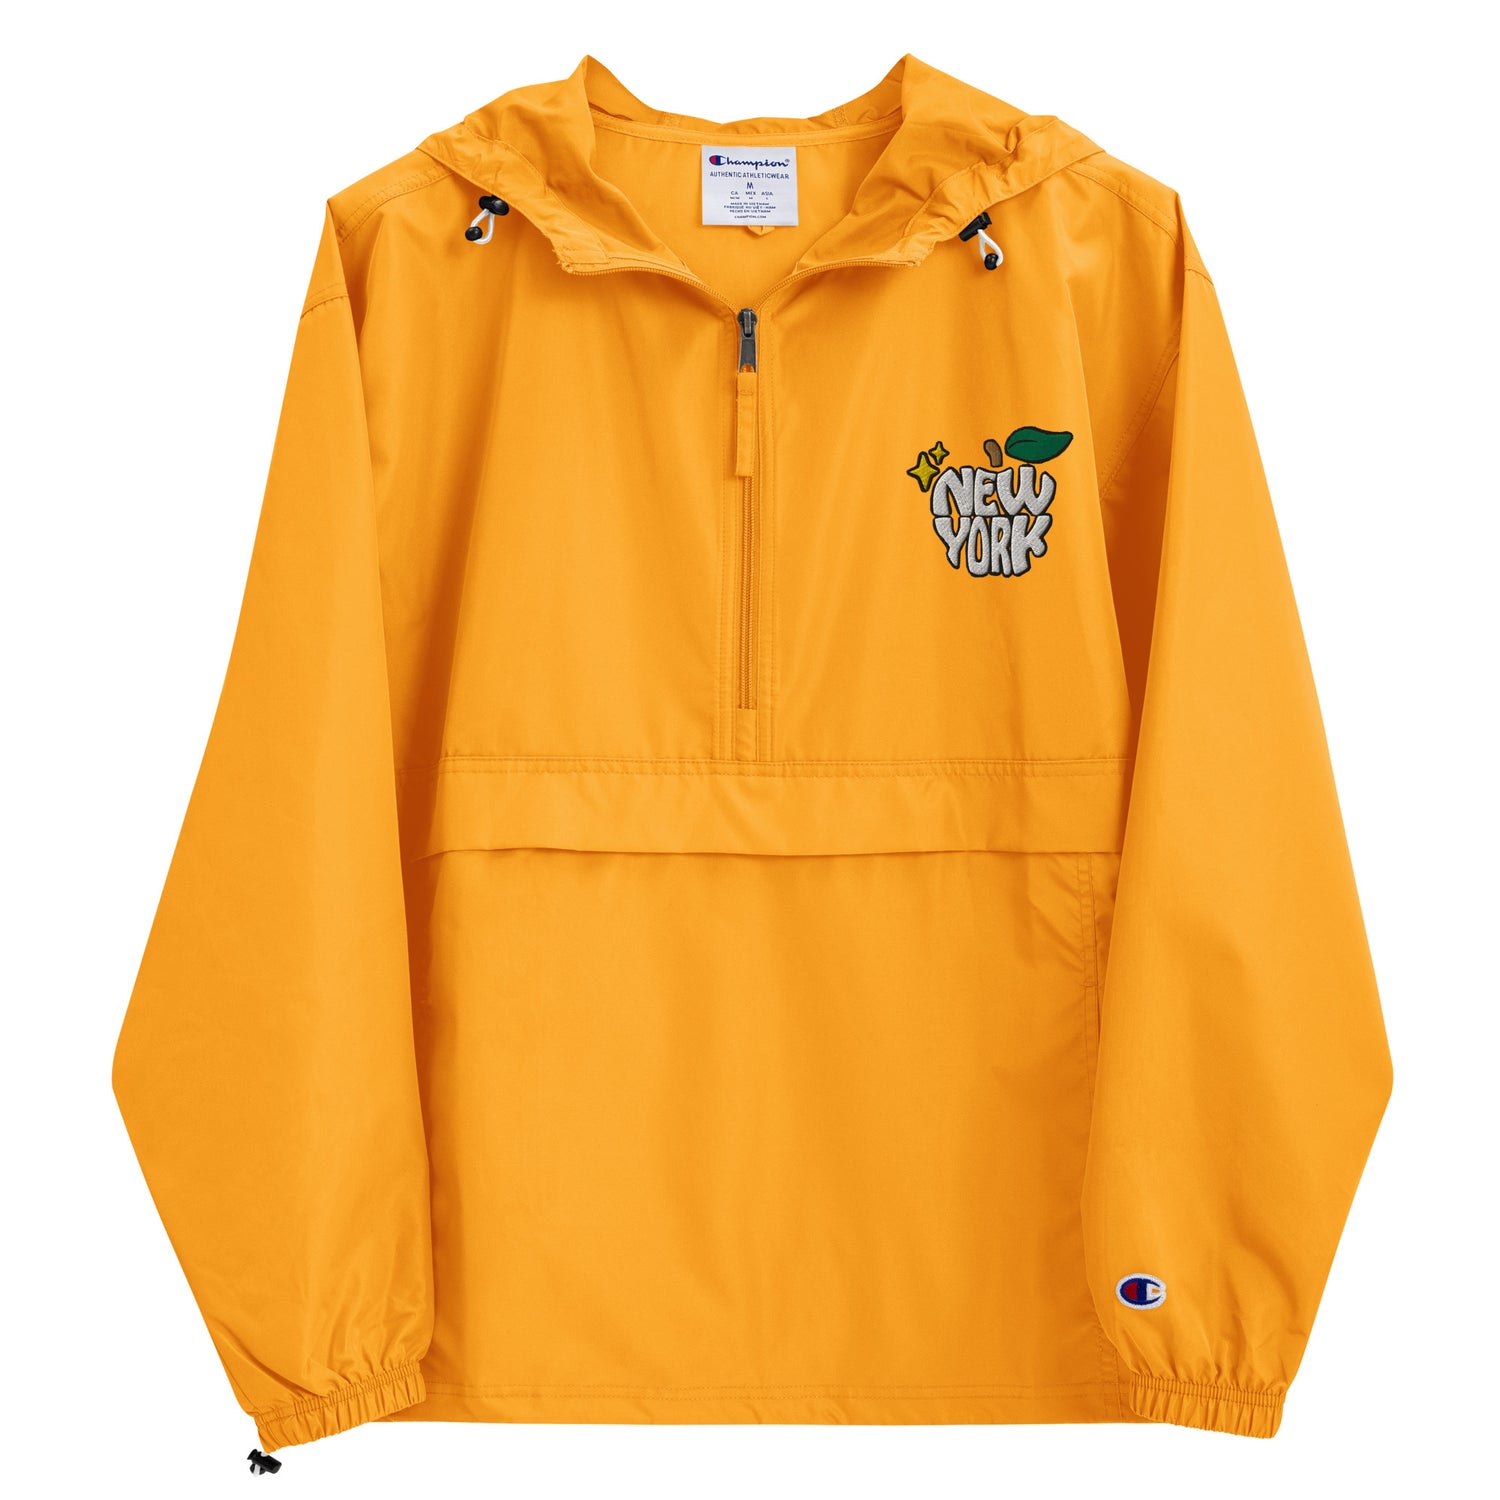 New York Apple Logo Embroidered Yellow Champion Packable Windbreaker Jacket Scattered Streetwear